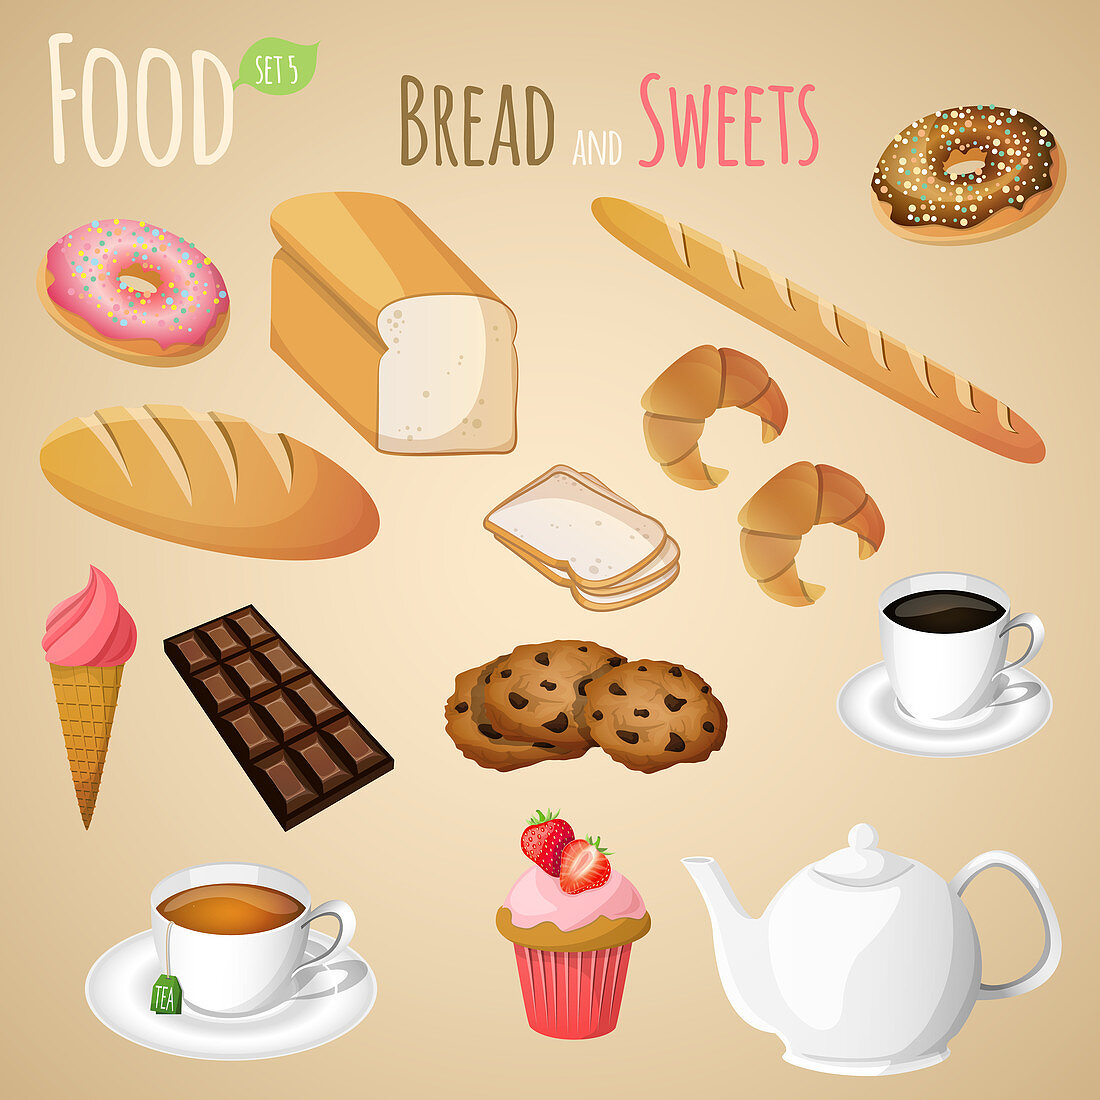 Breads and sweets, illustration